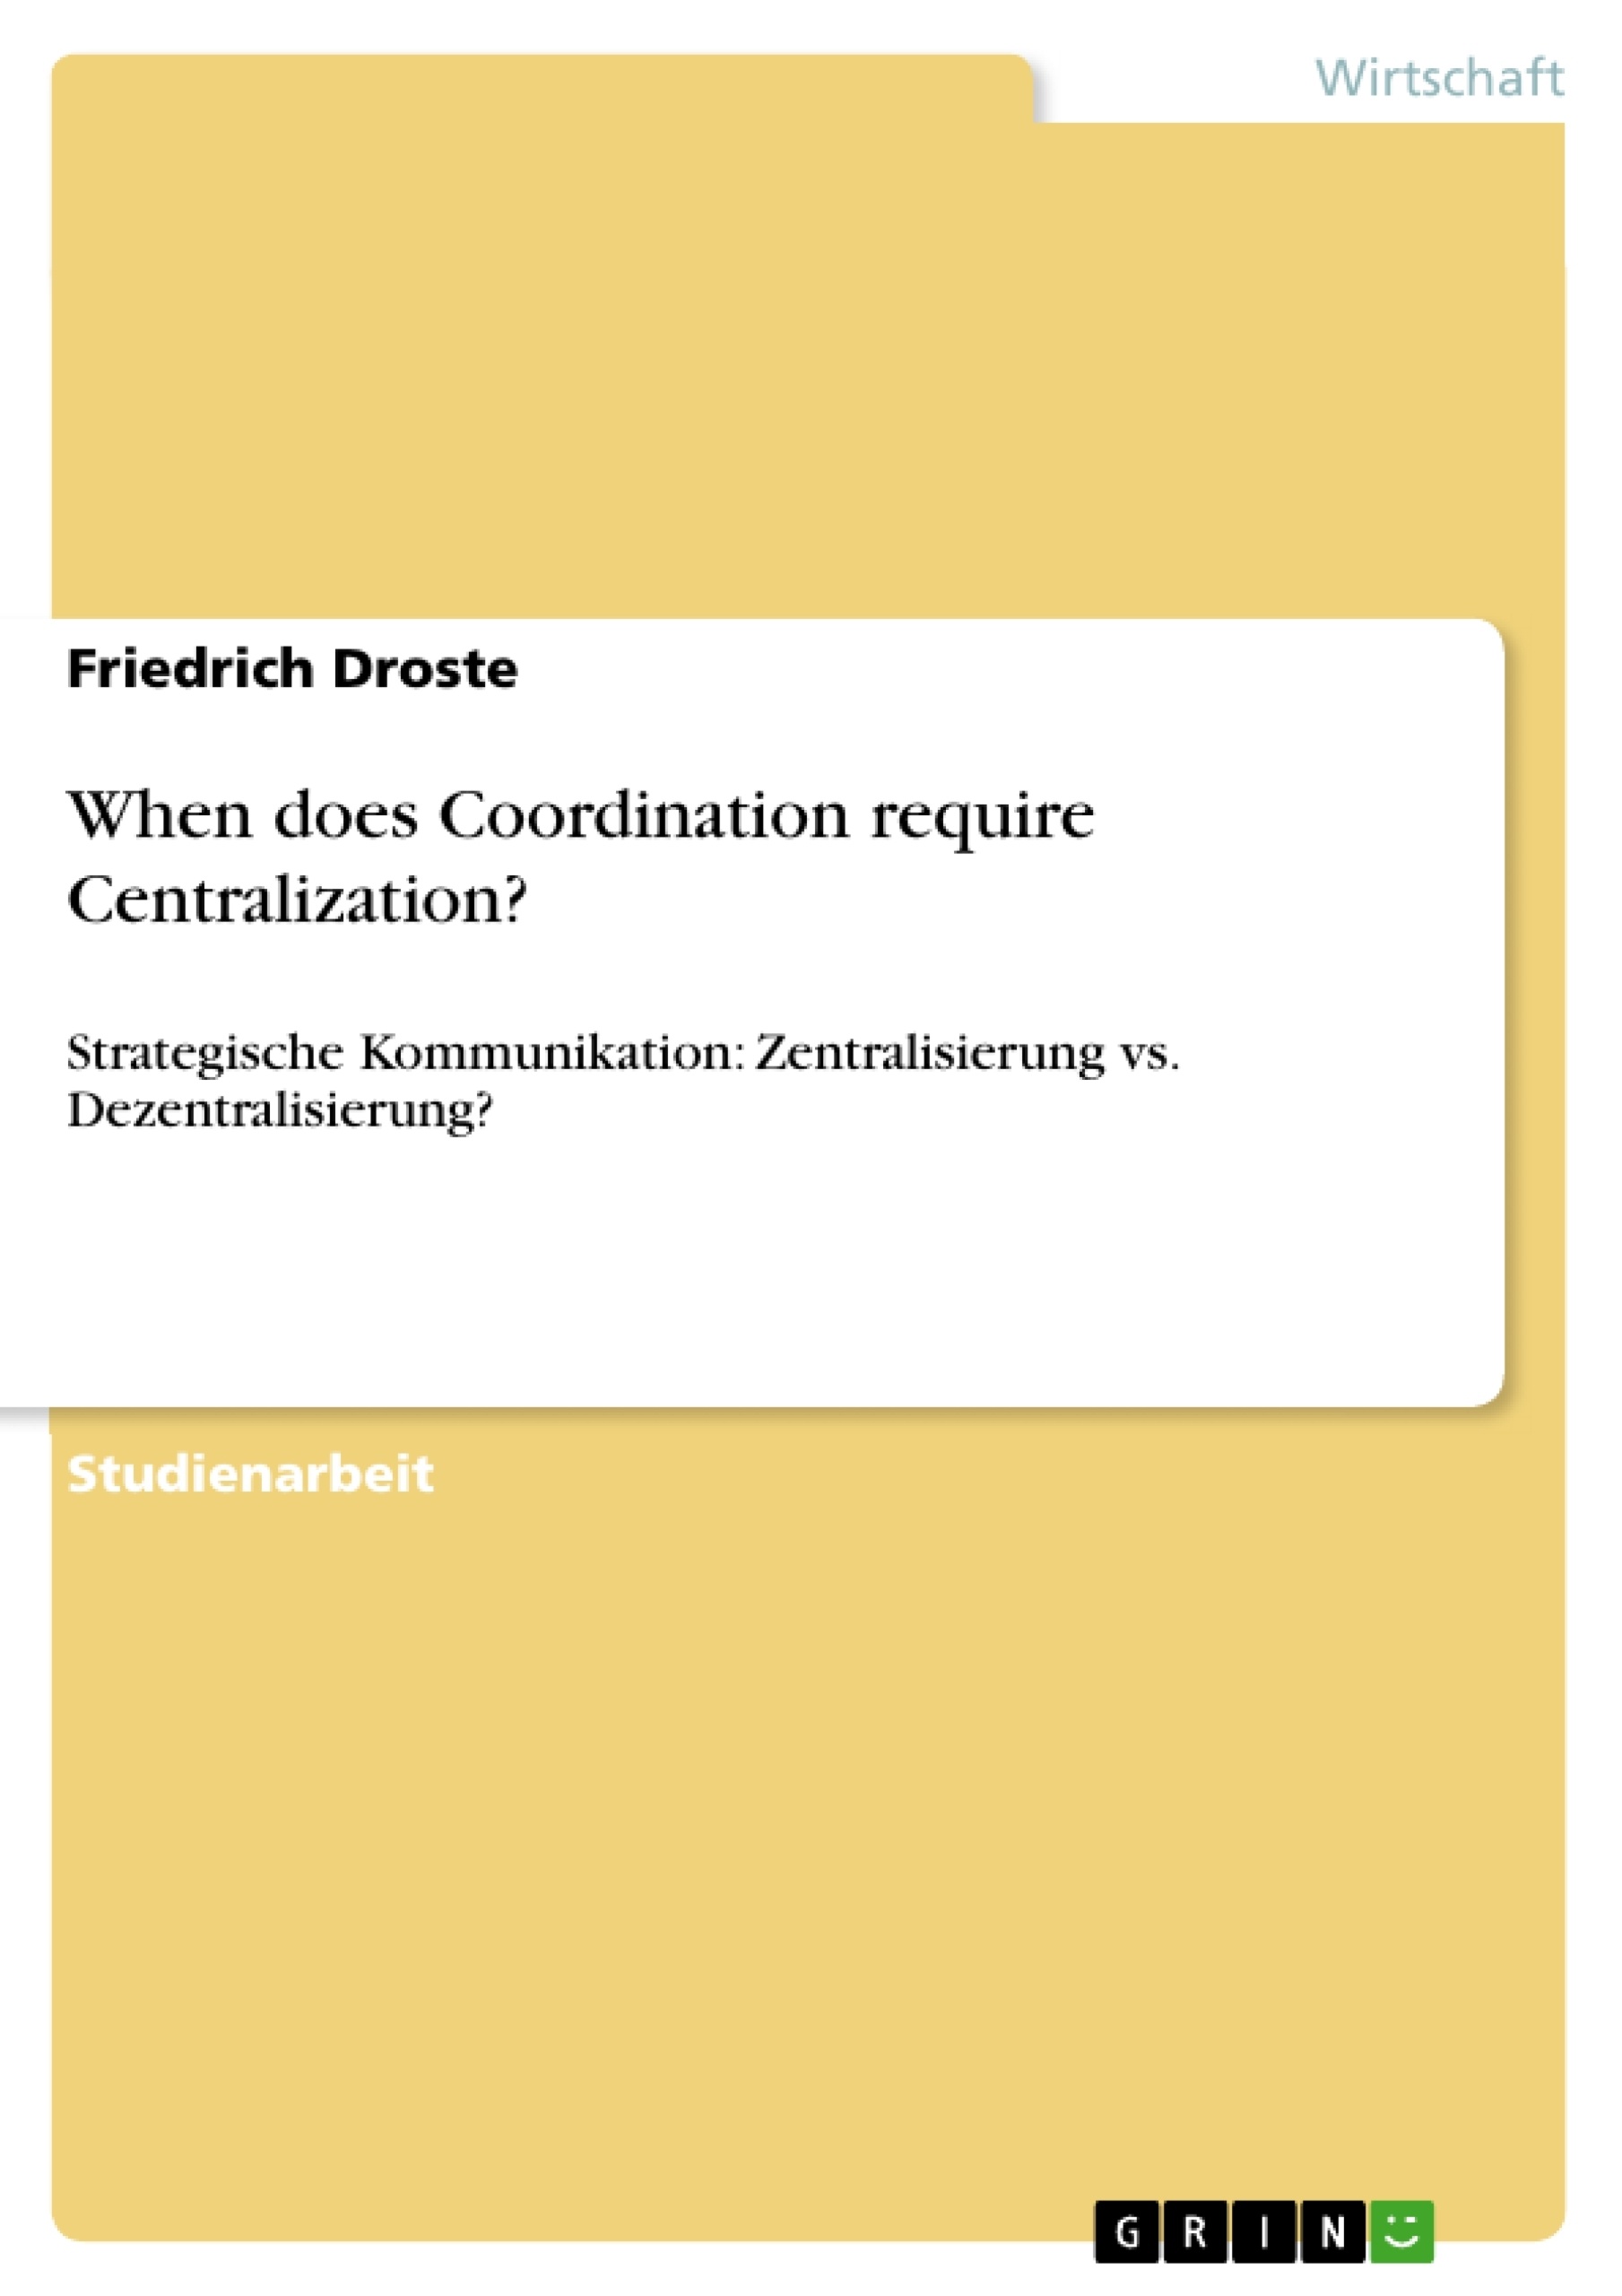 Título: When does Coordination require Centralization?